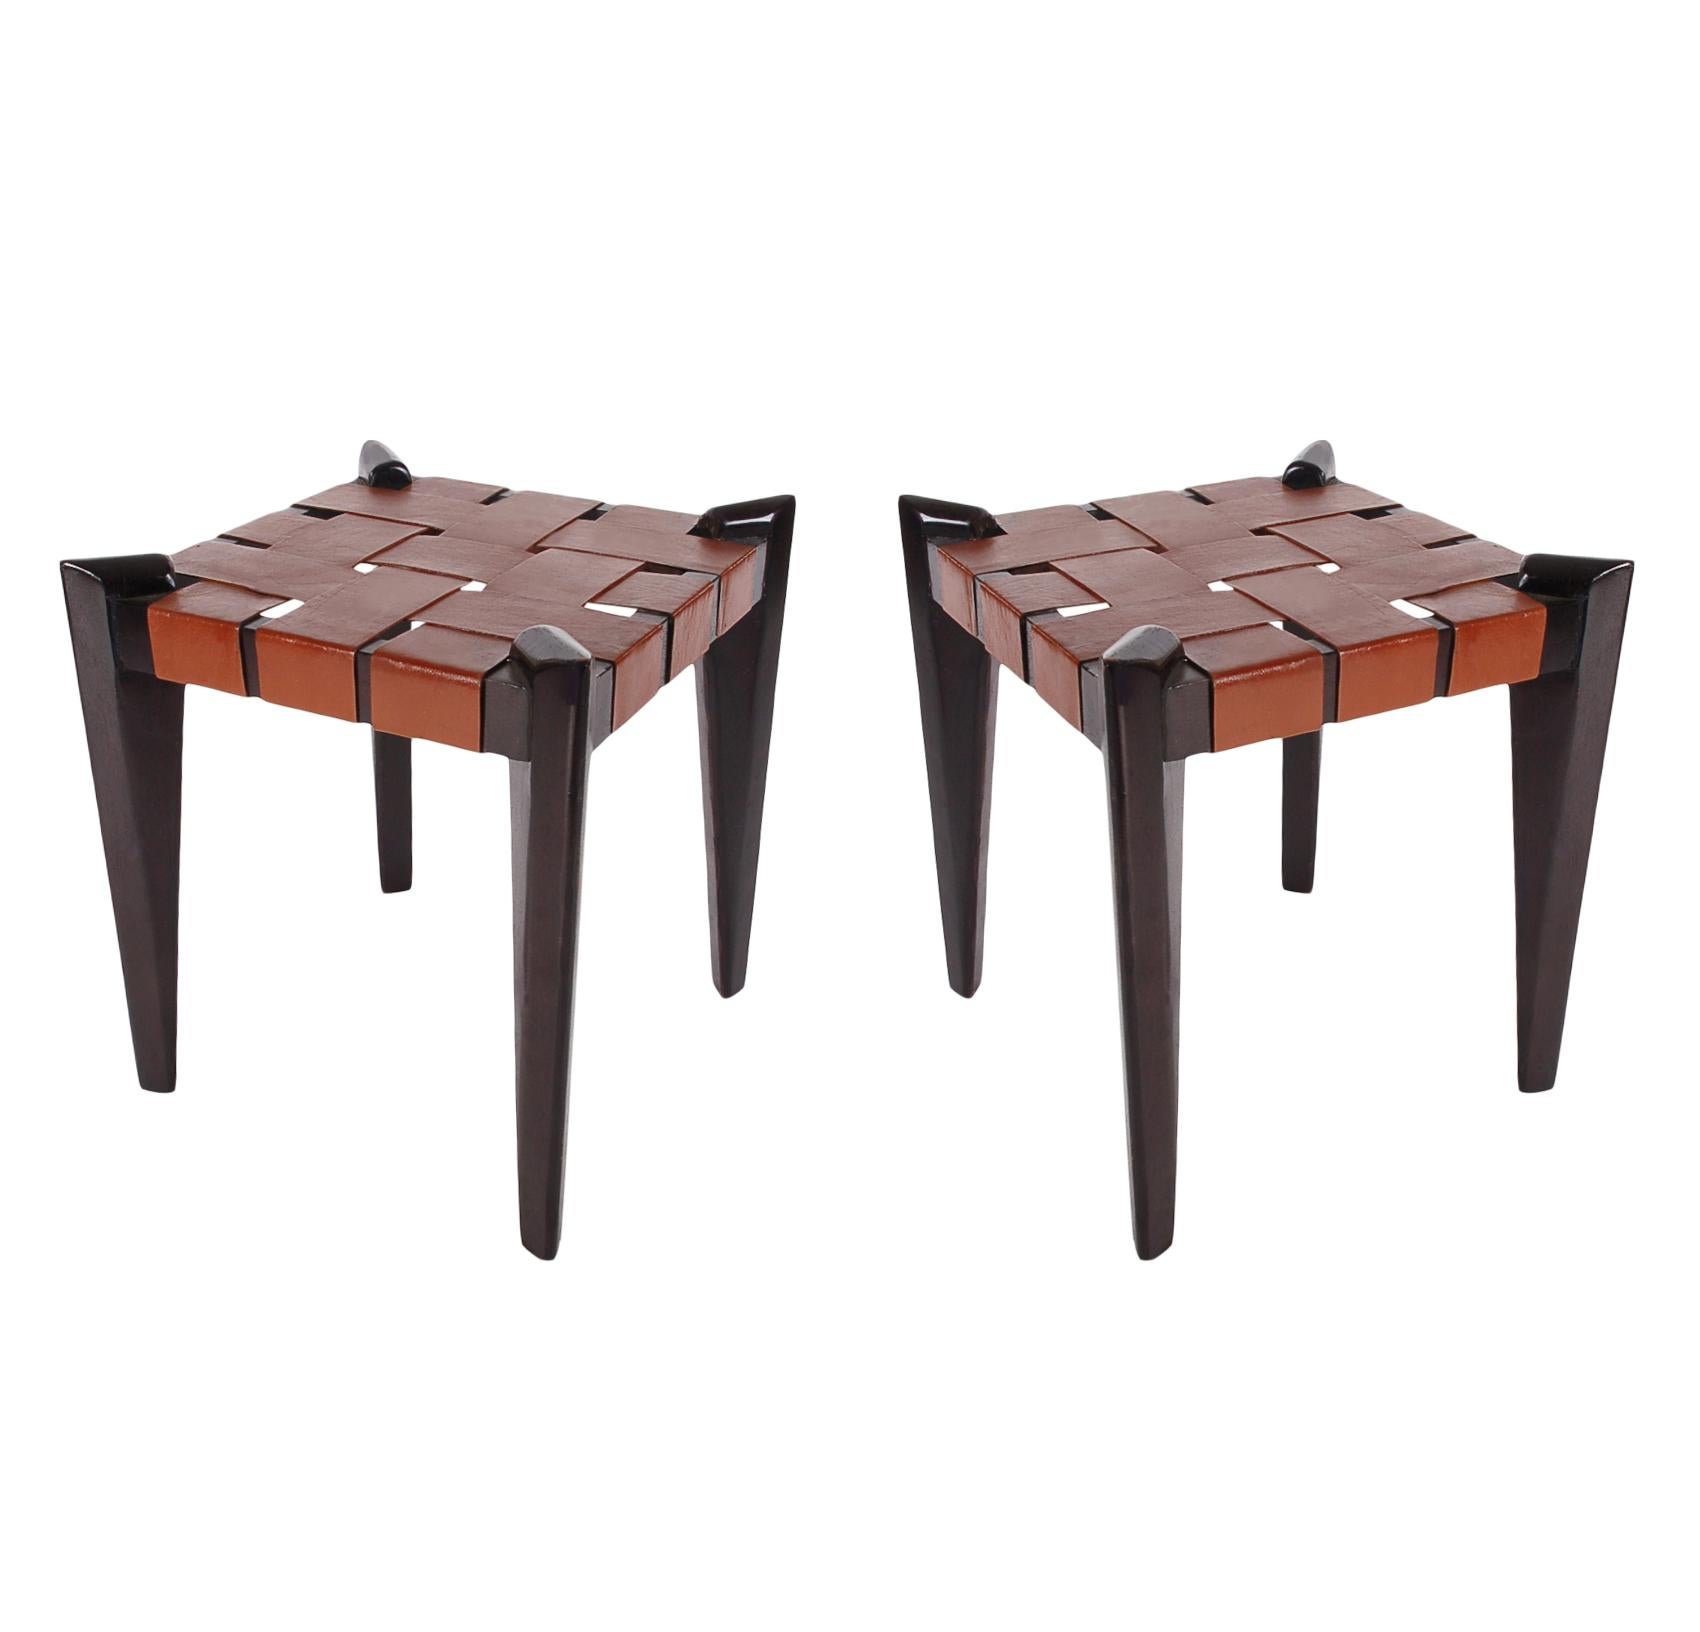 Mid-Century Modern Pair of Midcentury Danish Modern Woven Brown Leather Stools or Benches